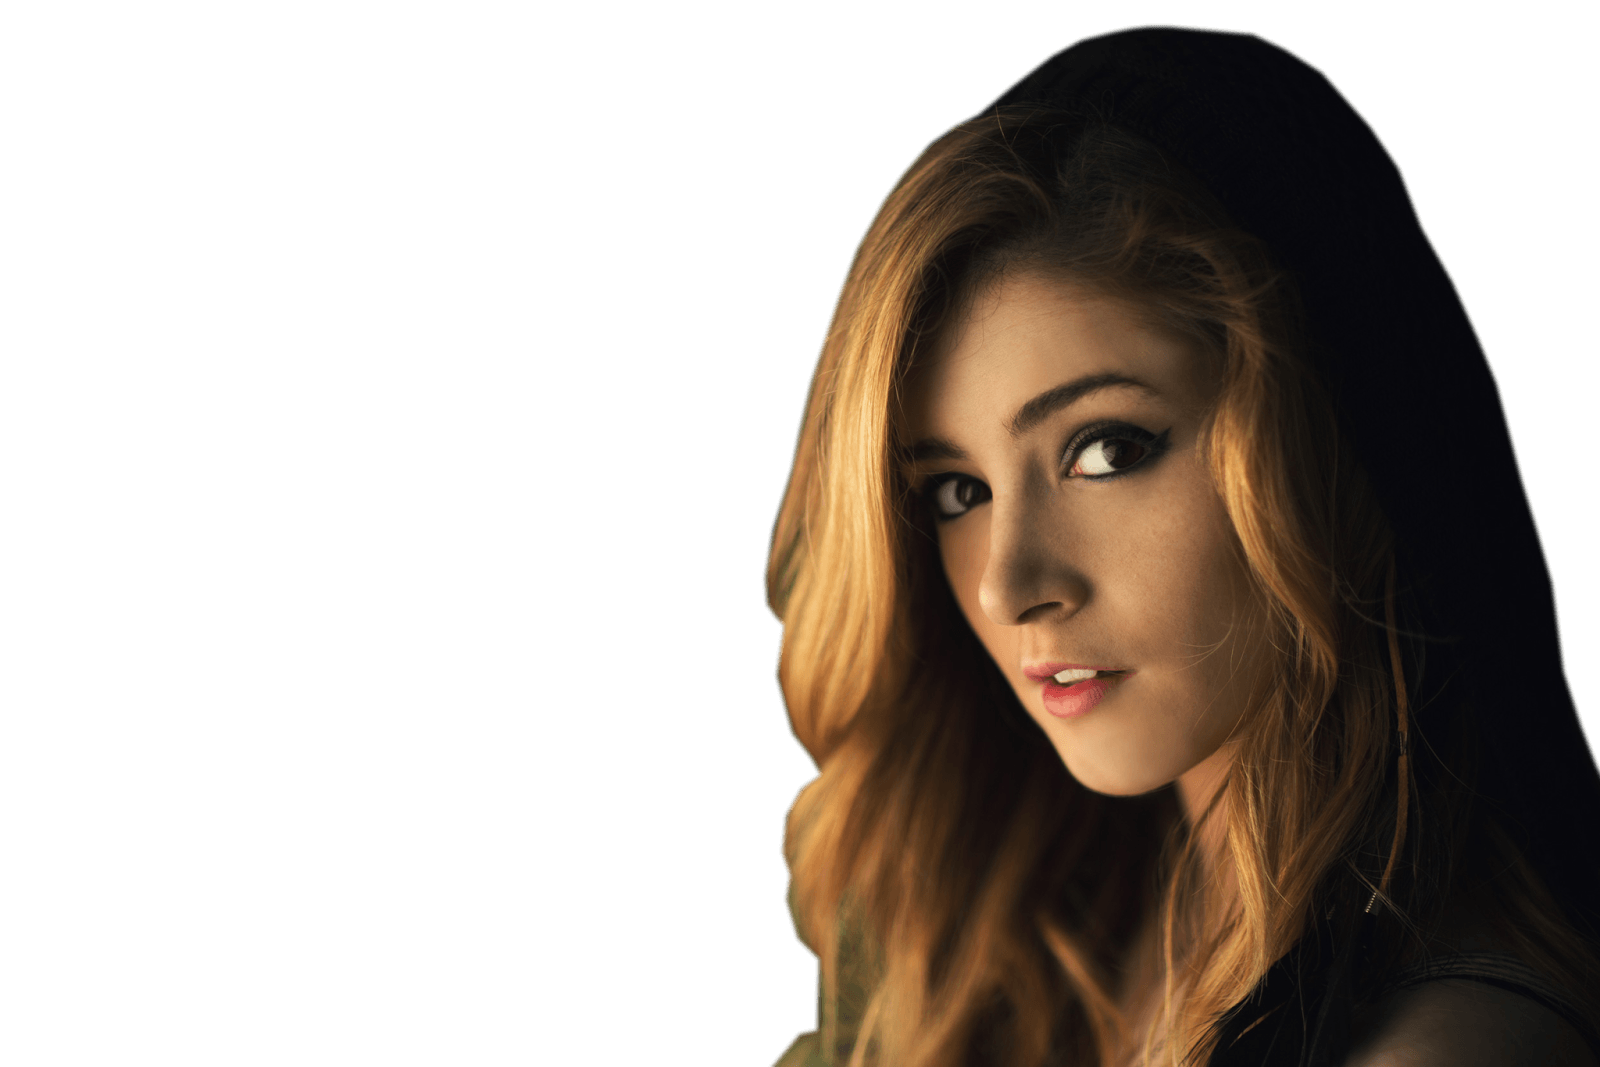 Young Singer Chrissy Costanza 2014 Wallpaper. Chrissy <3